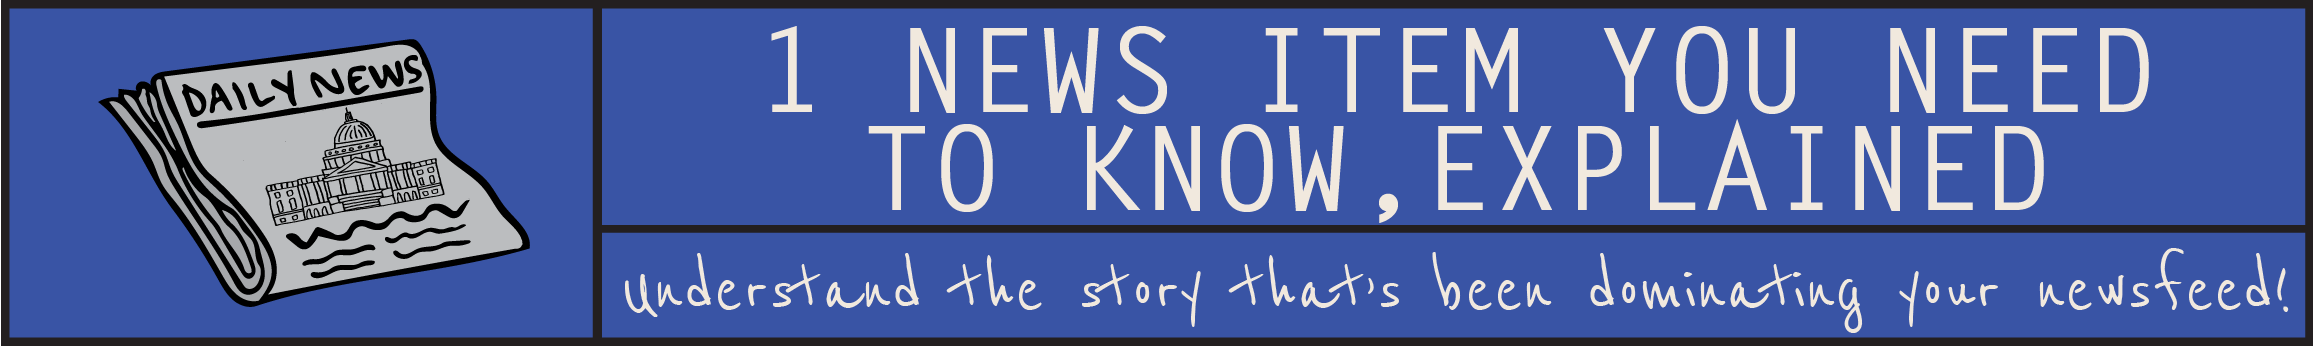 1 News Item You Should Know, Explained